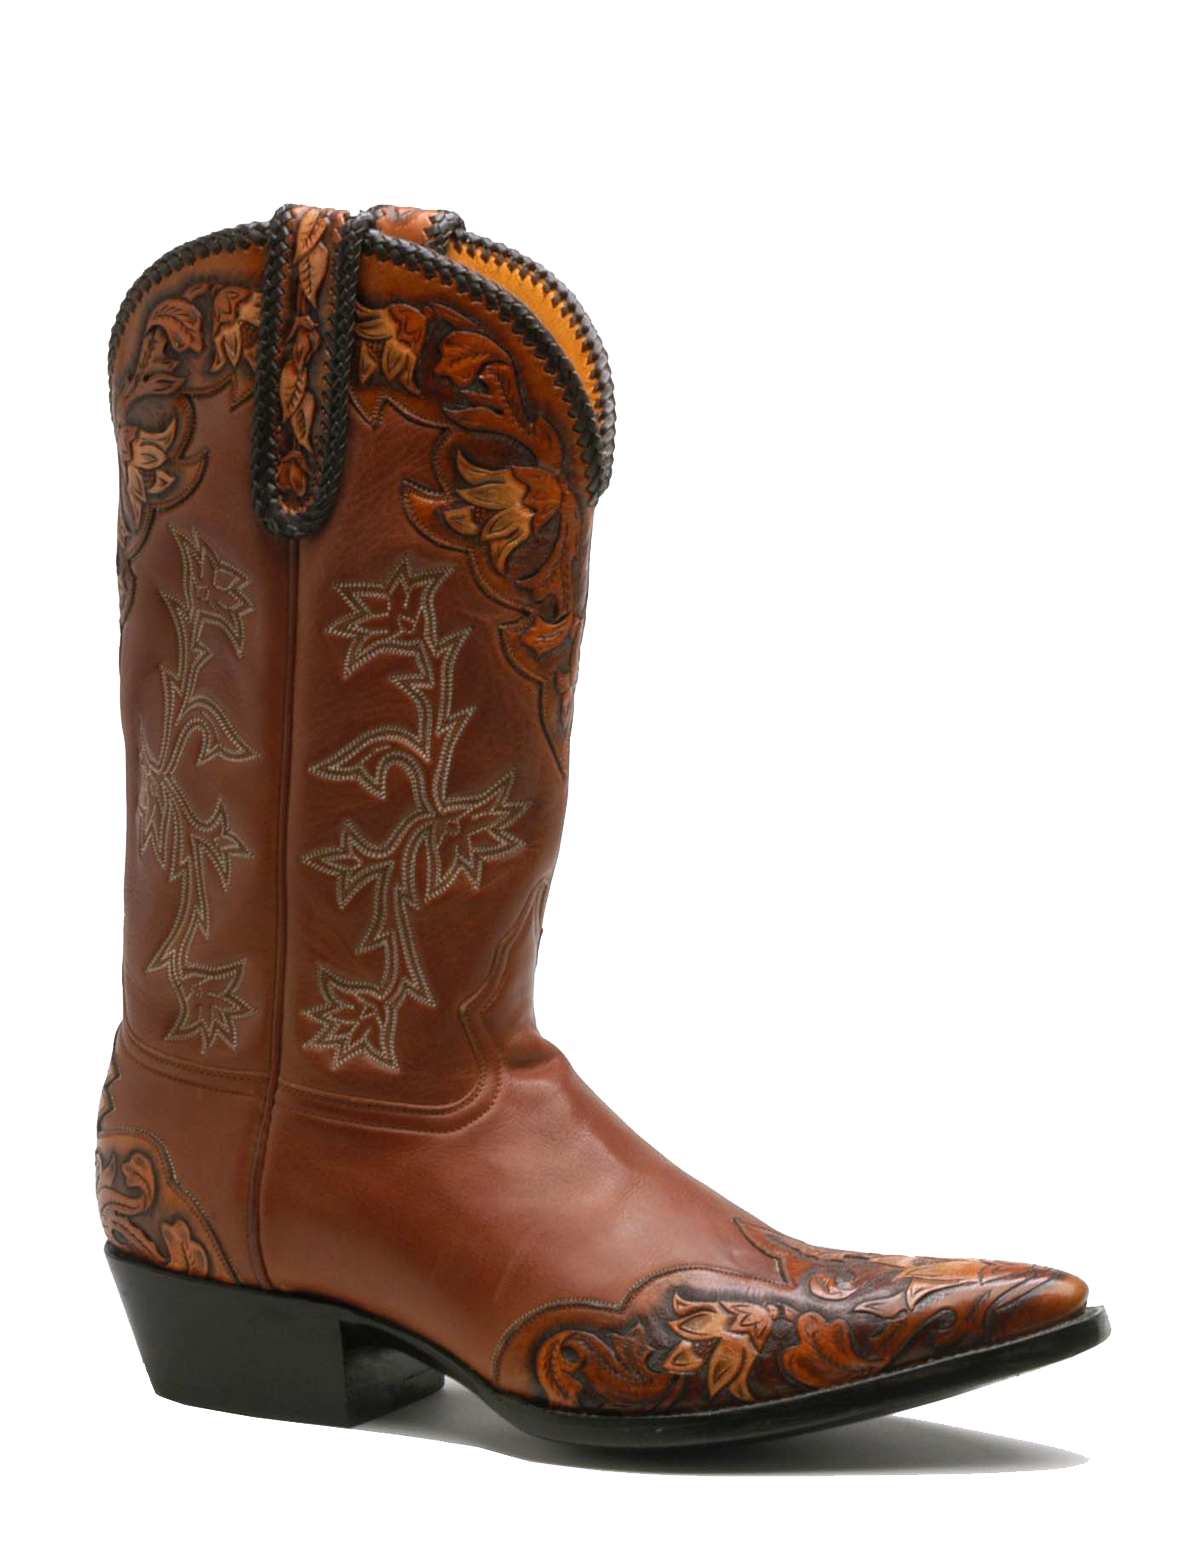 Boot Image PNG Image